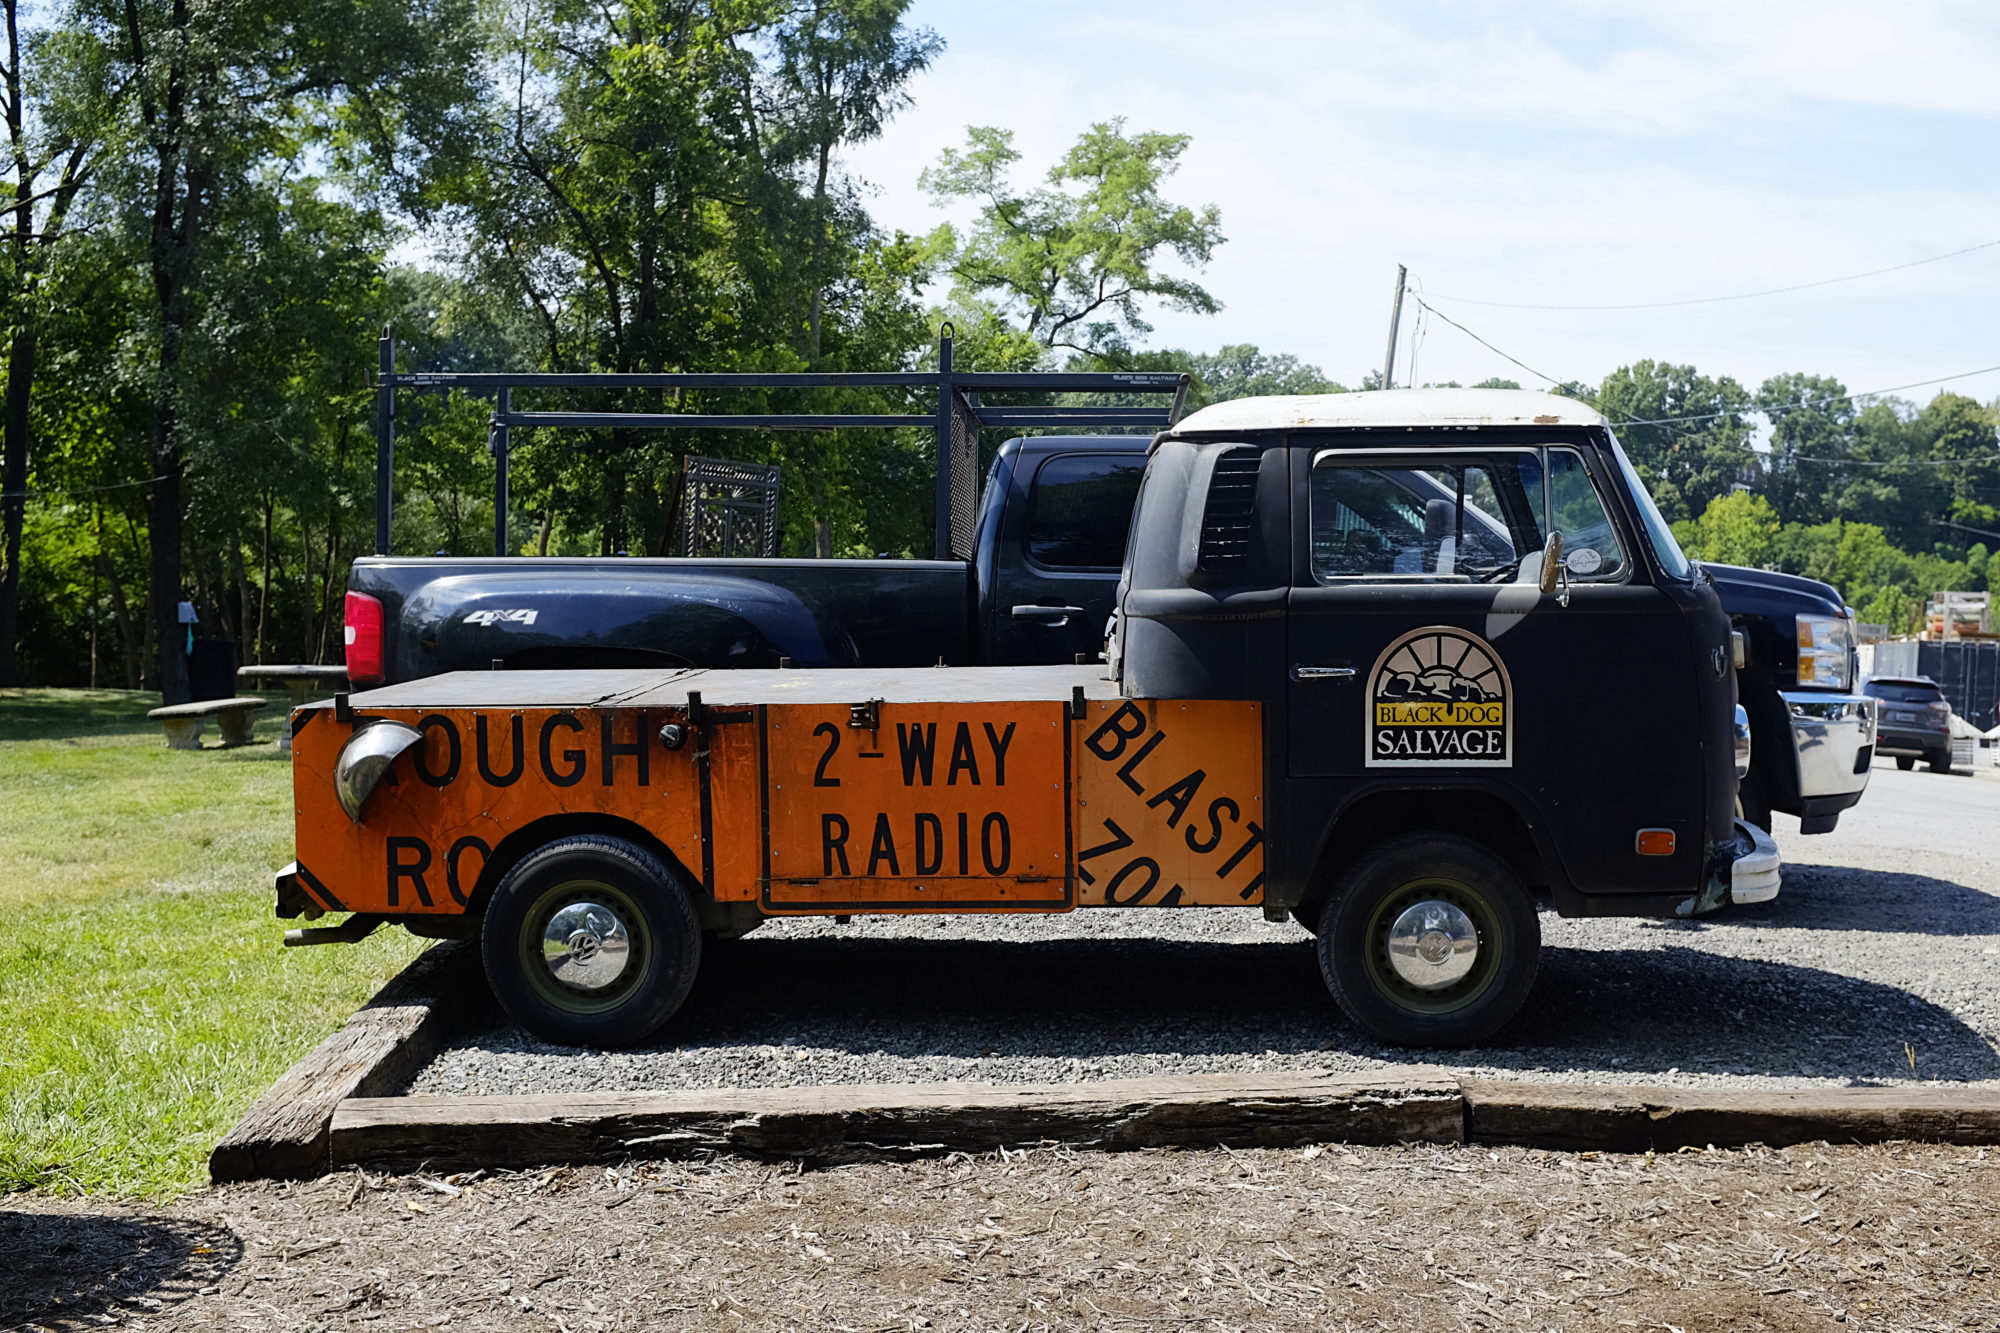 A vintage truck with the Black Dog Salvage logo